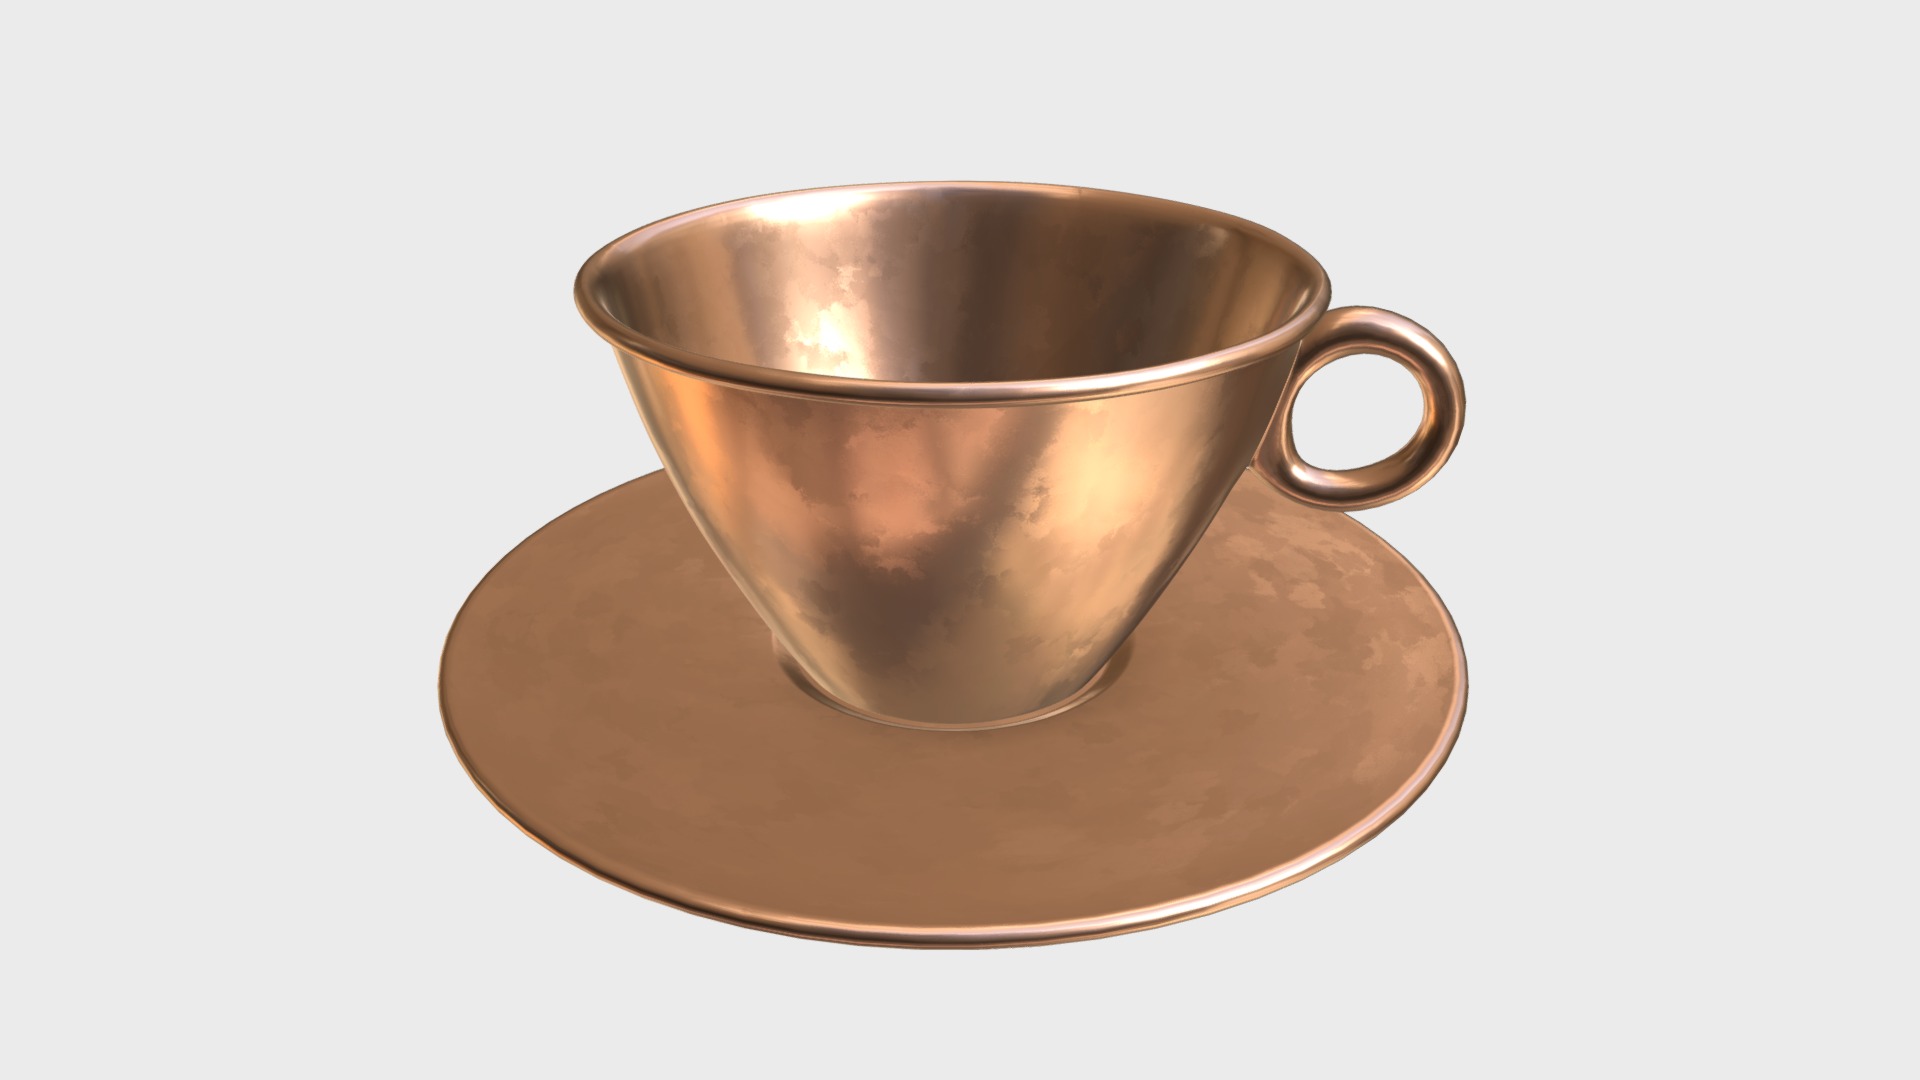 3D model Pure copper tea cup - This is a 3D model of the Pure copper tea cup. The 3D model is about a brown cup on a white surface.